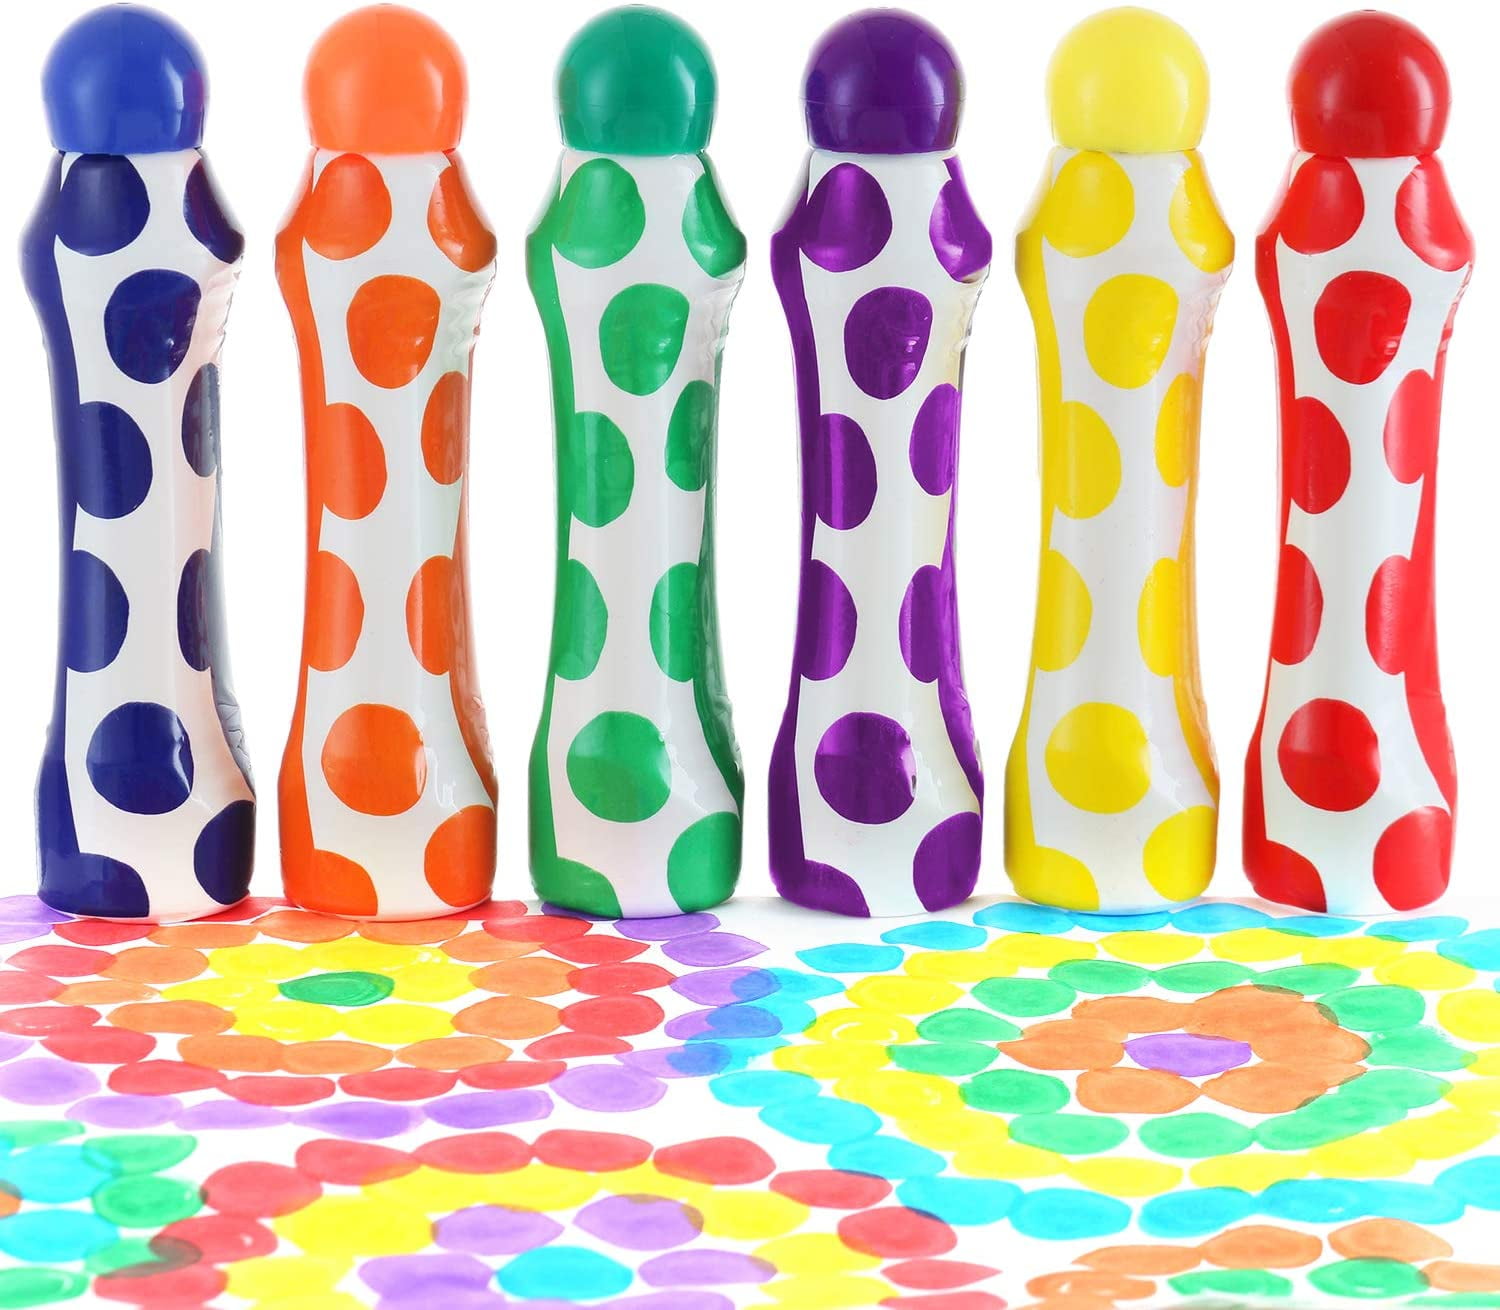 10 Colors Glokers Jumbo Washable Dot Markers for Kids | Washable Children Easy-Grip Art Dobber Dabbers No Mess Preschool Daub Tubes Great for Bingo Stamps and Accessories 